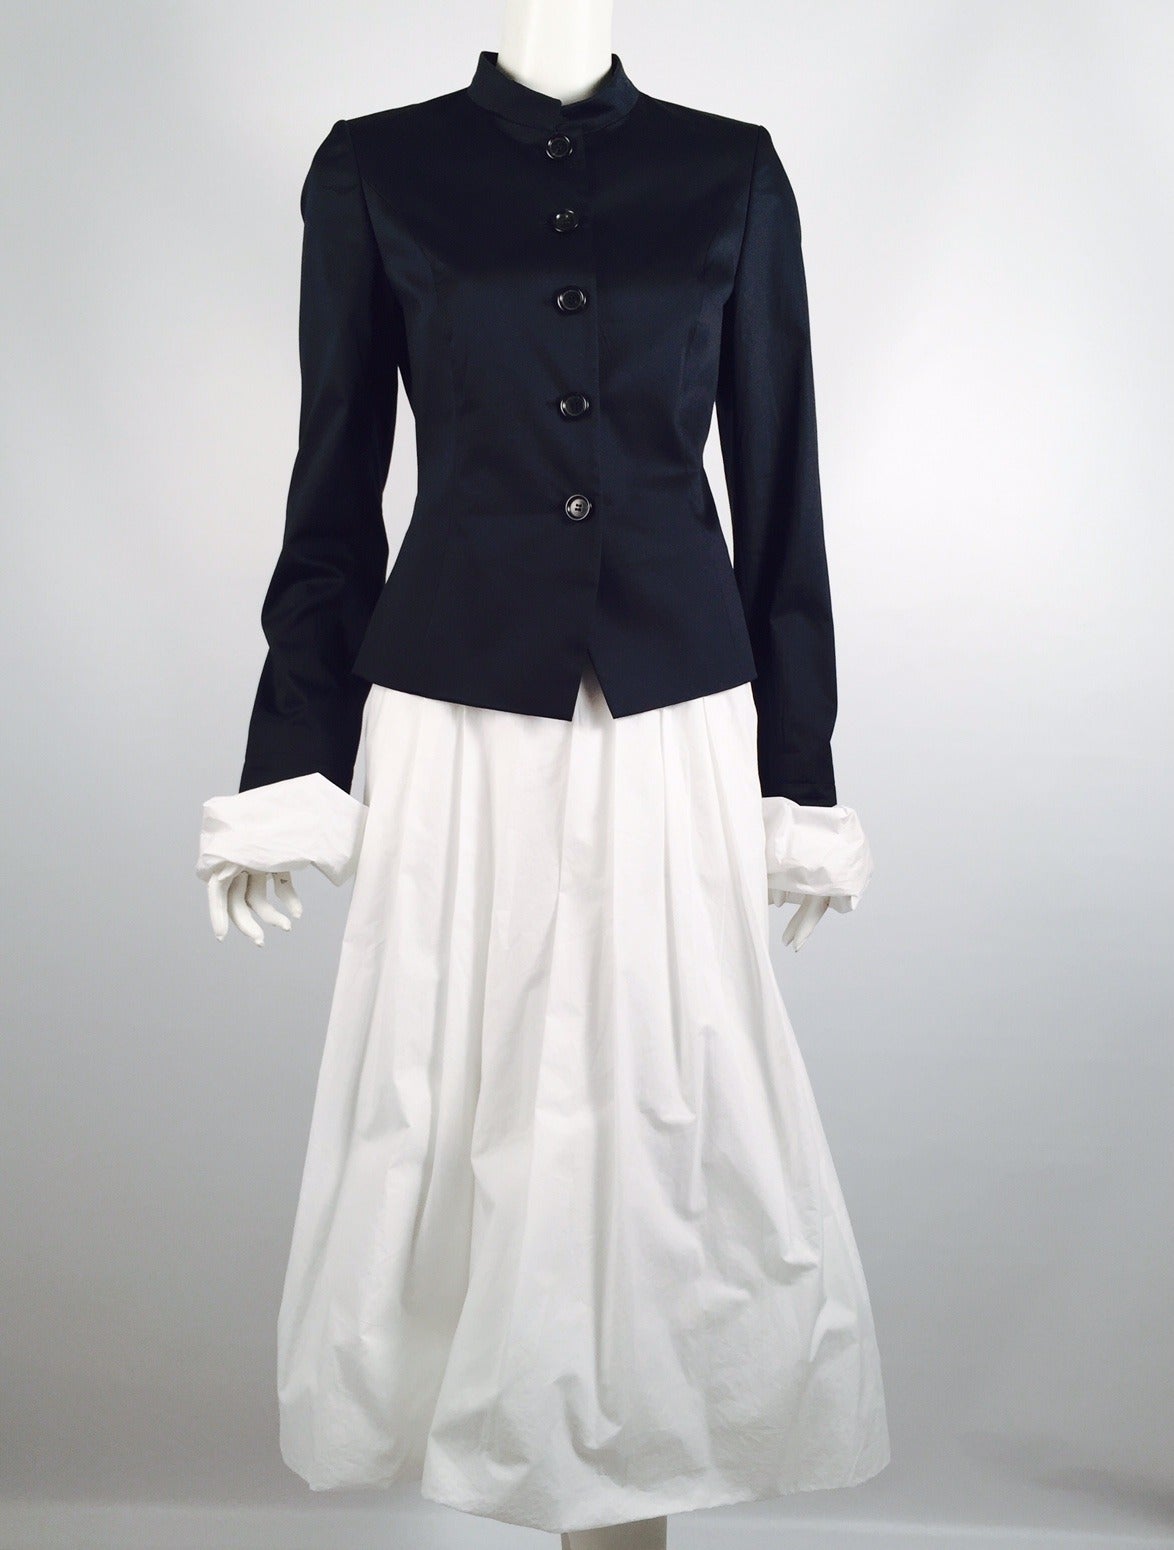 Pauw Navy and White Cotton Skirt Suit is true to the design sensibilities of the Netherlands!  Subtle, elegant, and deceptively simple design is the hallmark of this unforgettable ensemble.  Detachable white pouf collar and cuffs reveal a fitted